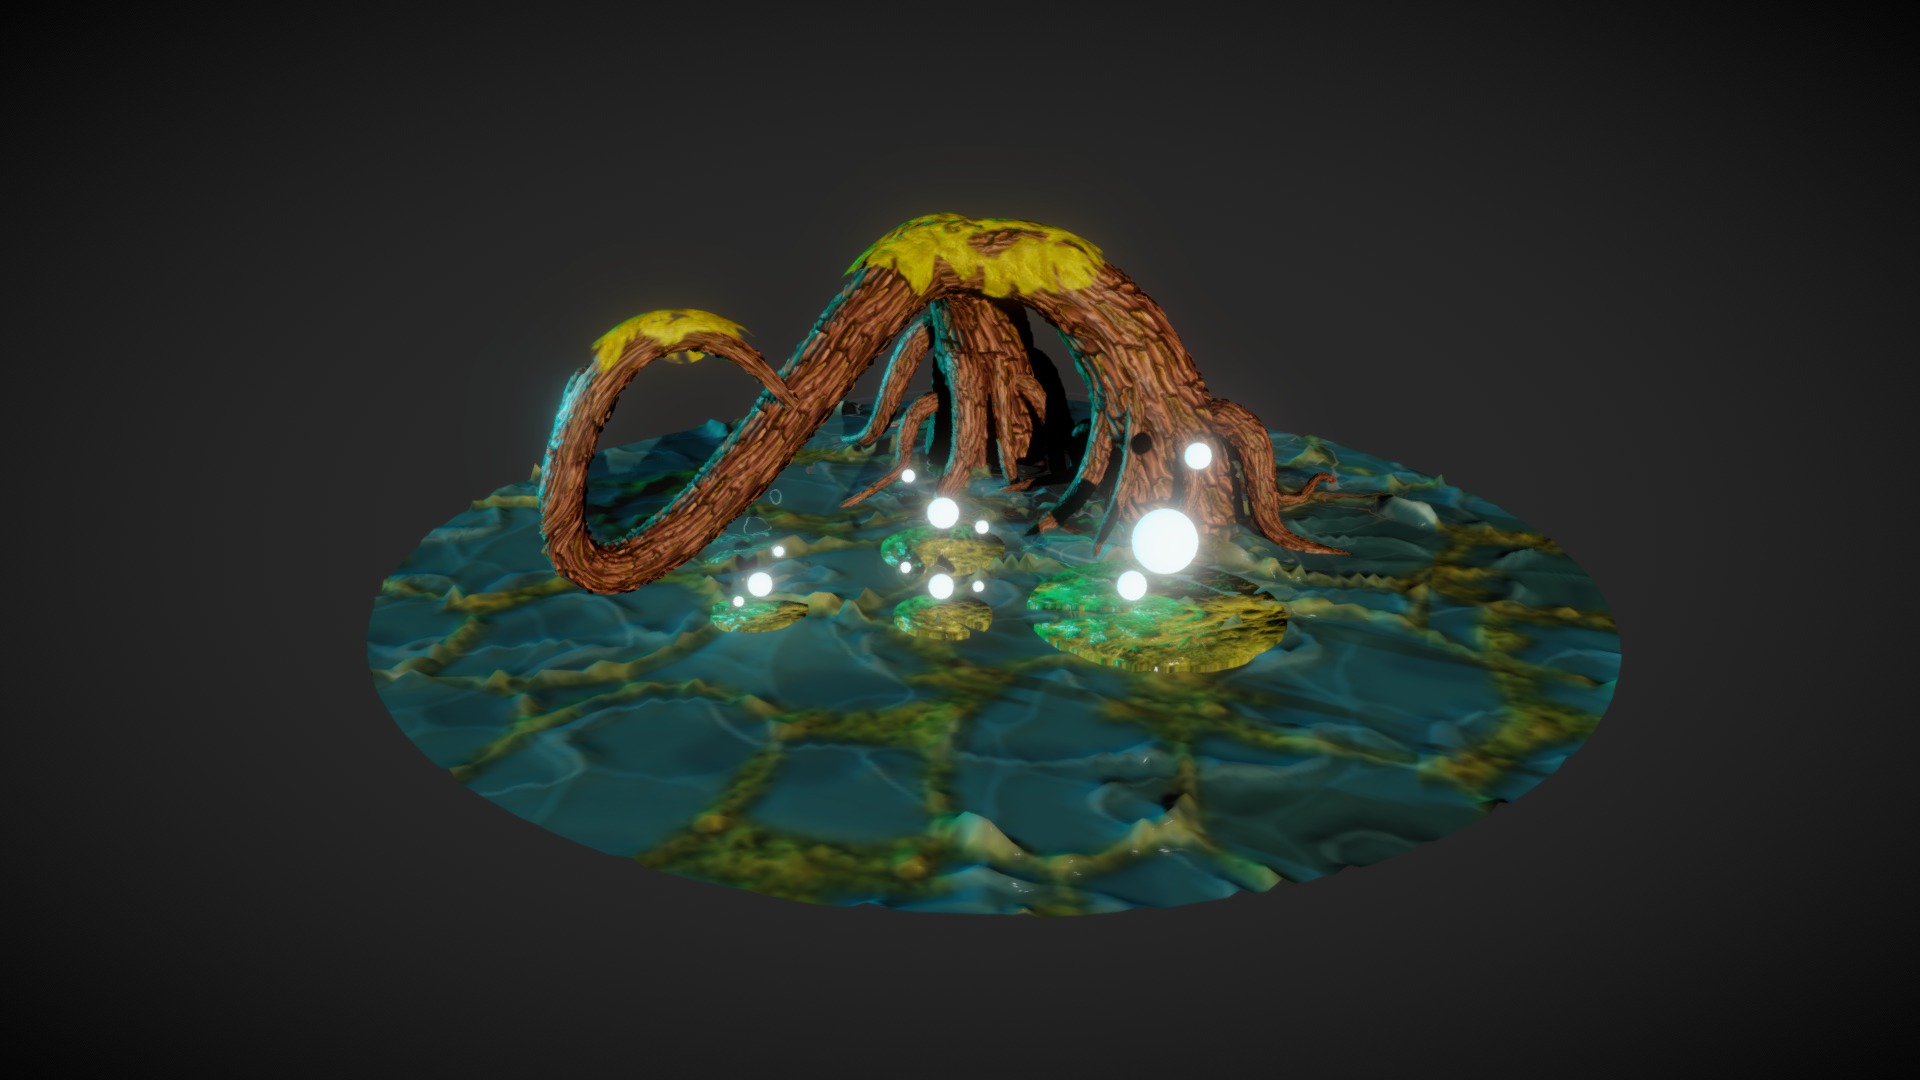 3D model Swamp Tree - This is a 3D model of the Swamp Tree. The 3D model is about a snail floating in water.